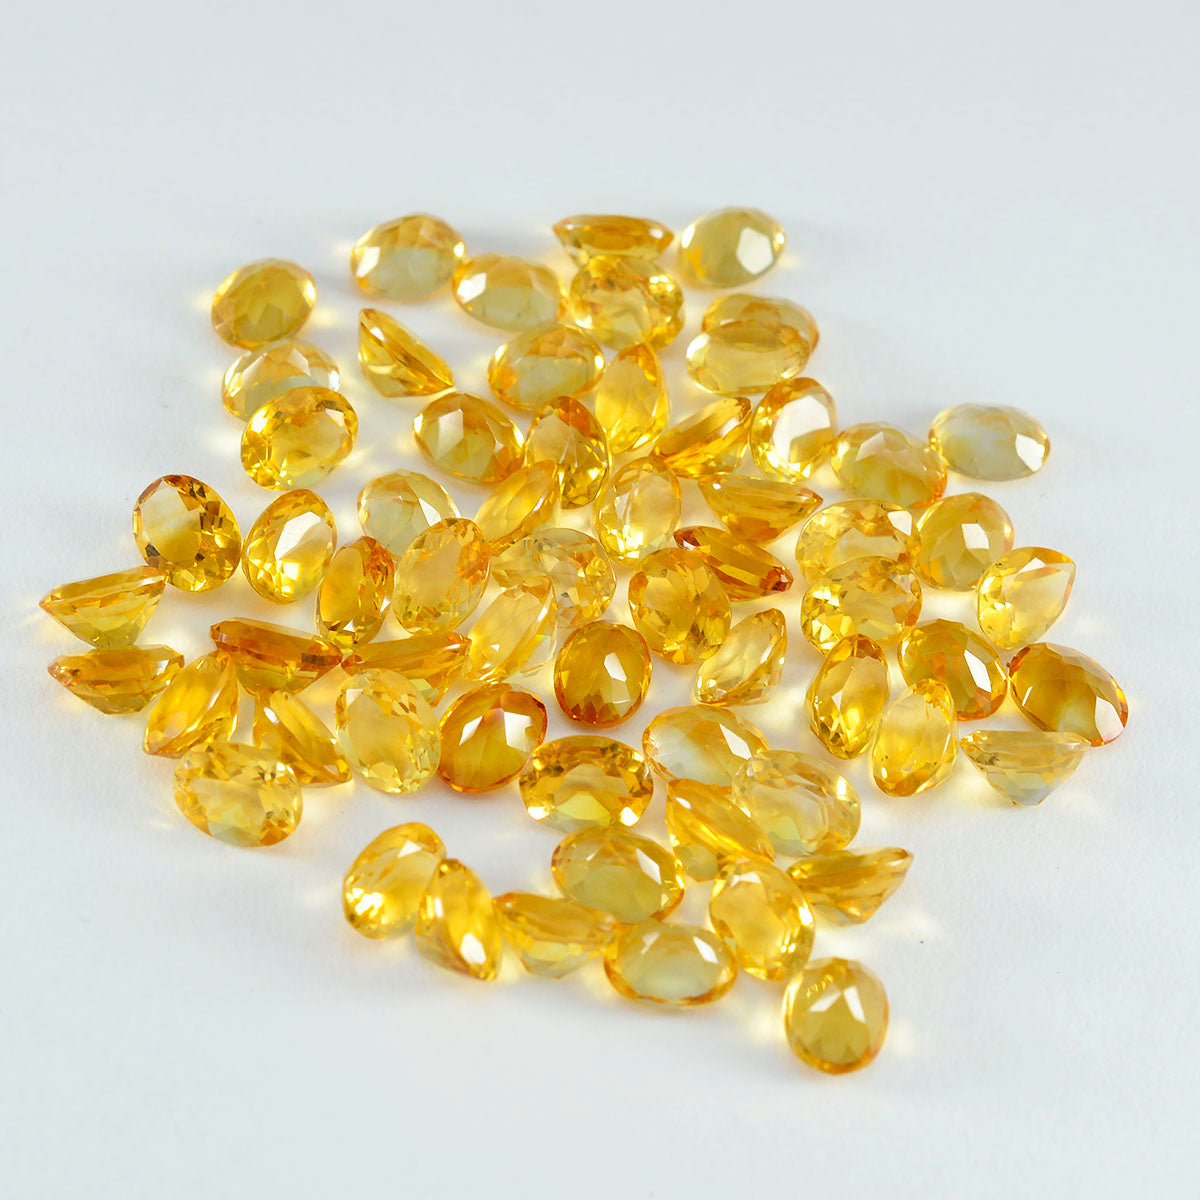 Riyogems 1PC Natural Yellow Citrine Faceted 5x7 mm Oval Shape beautiful Quality Loose Gems